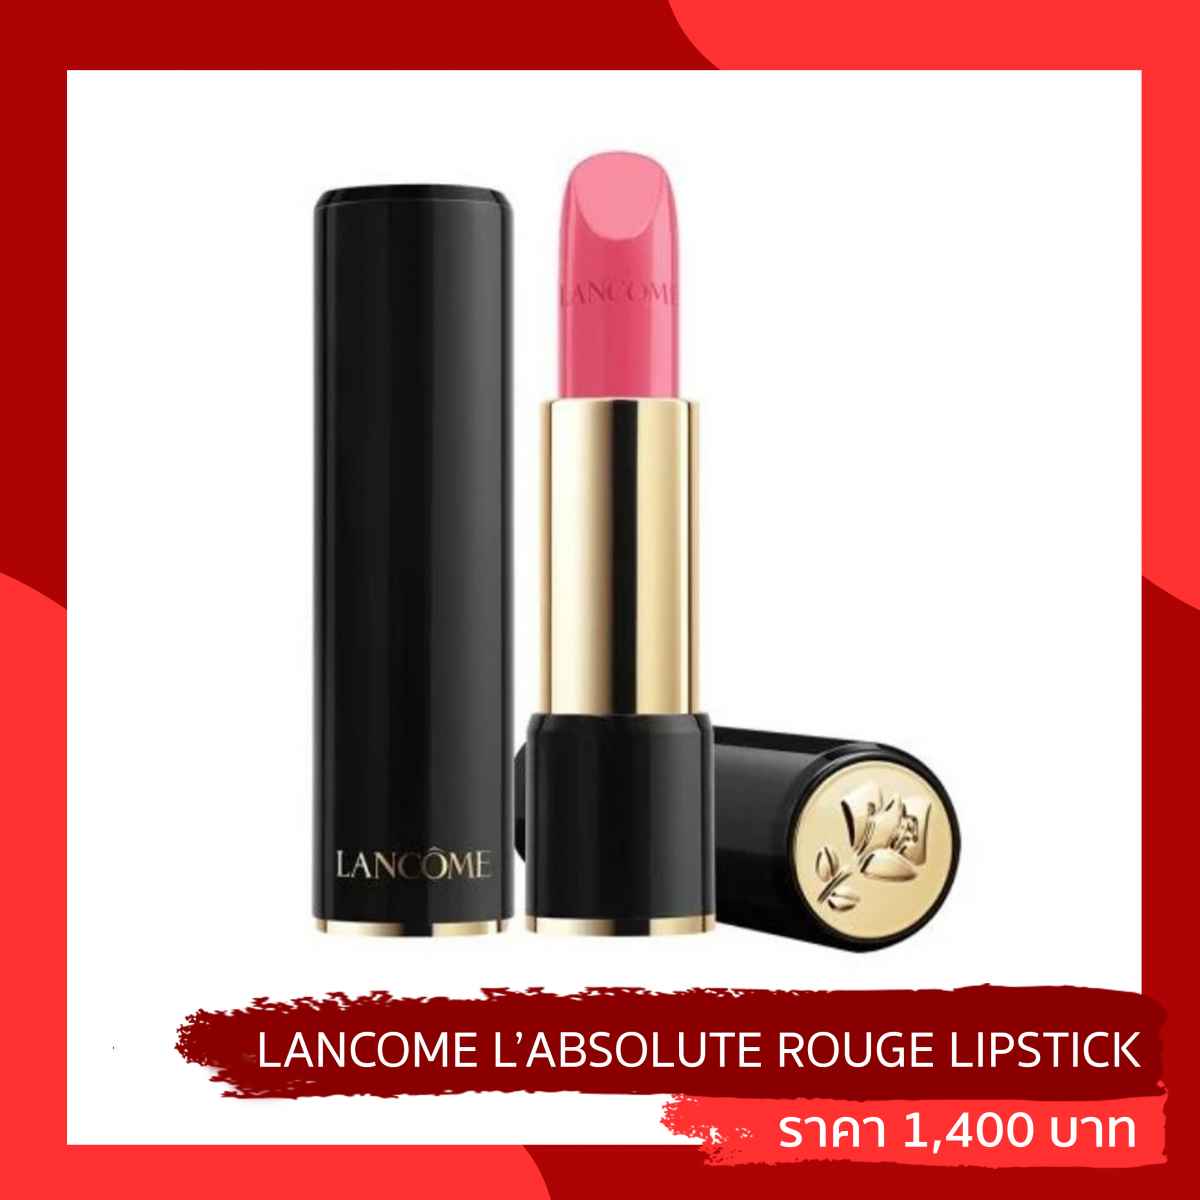 LANCOME L’ABSOLUTE ROUGE LIPSTICK